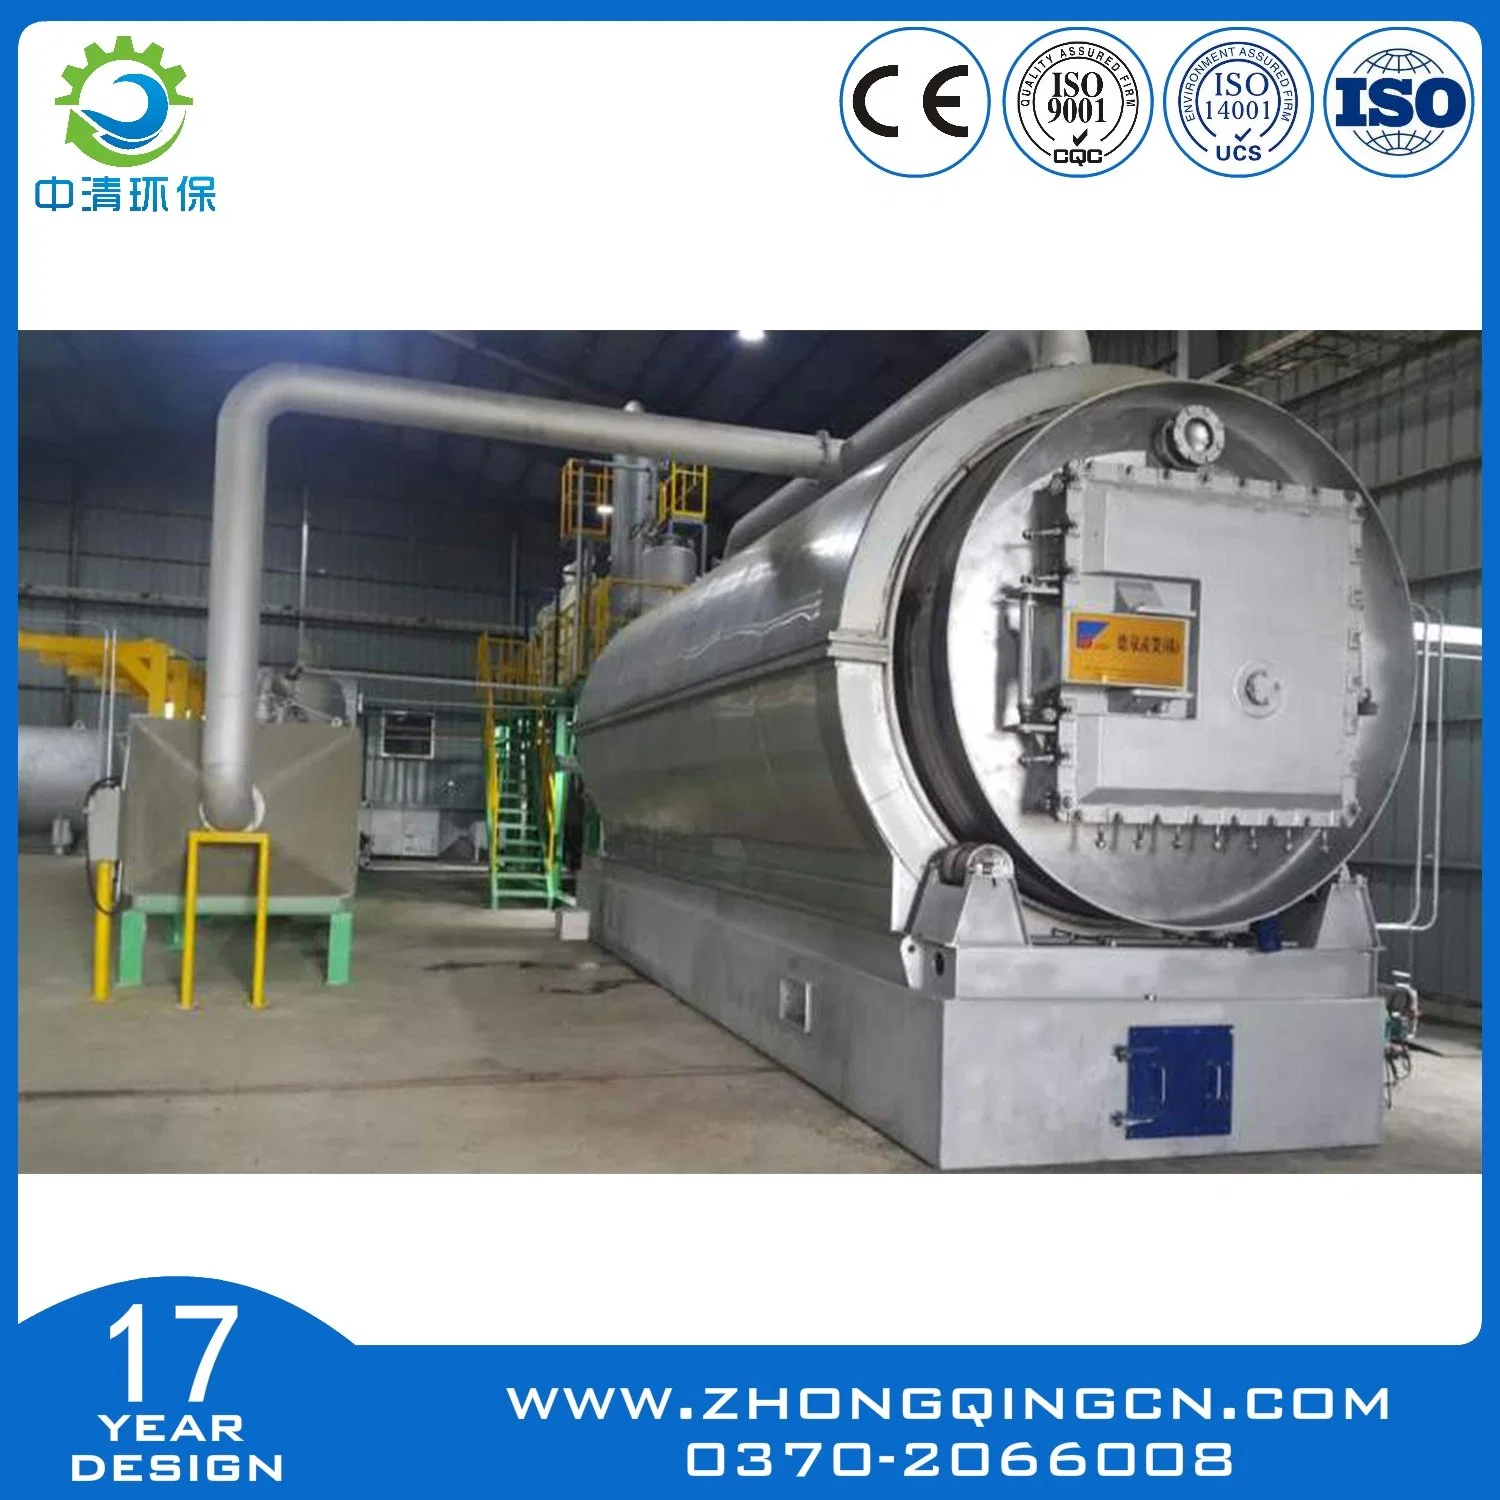 Automatic Tire Recycling Machine with Good Quality